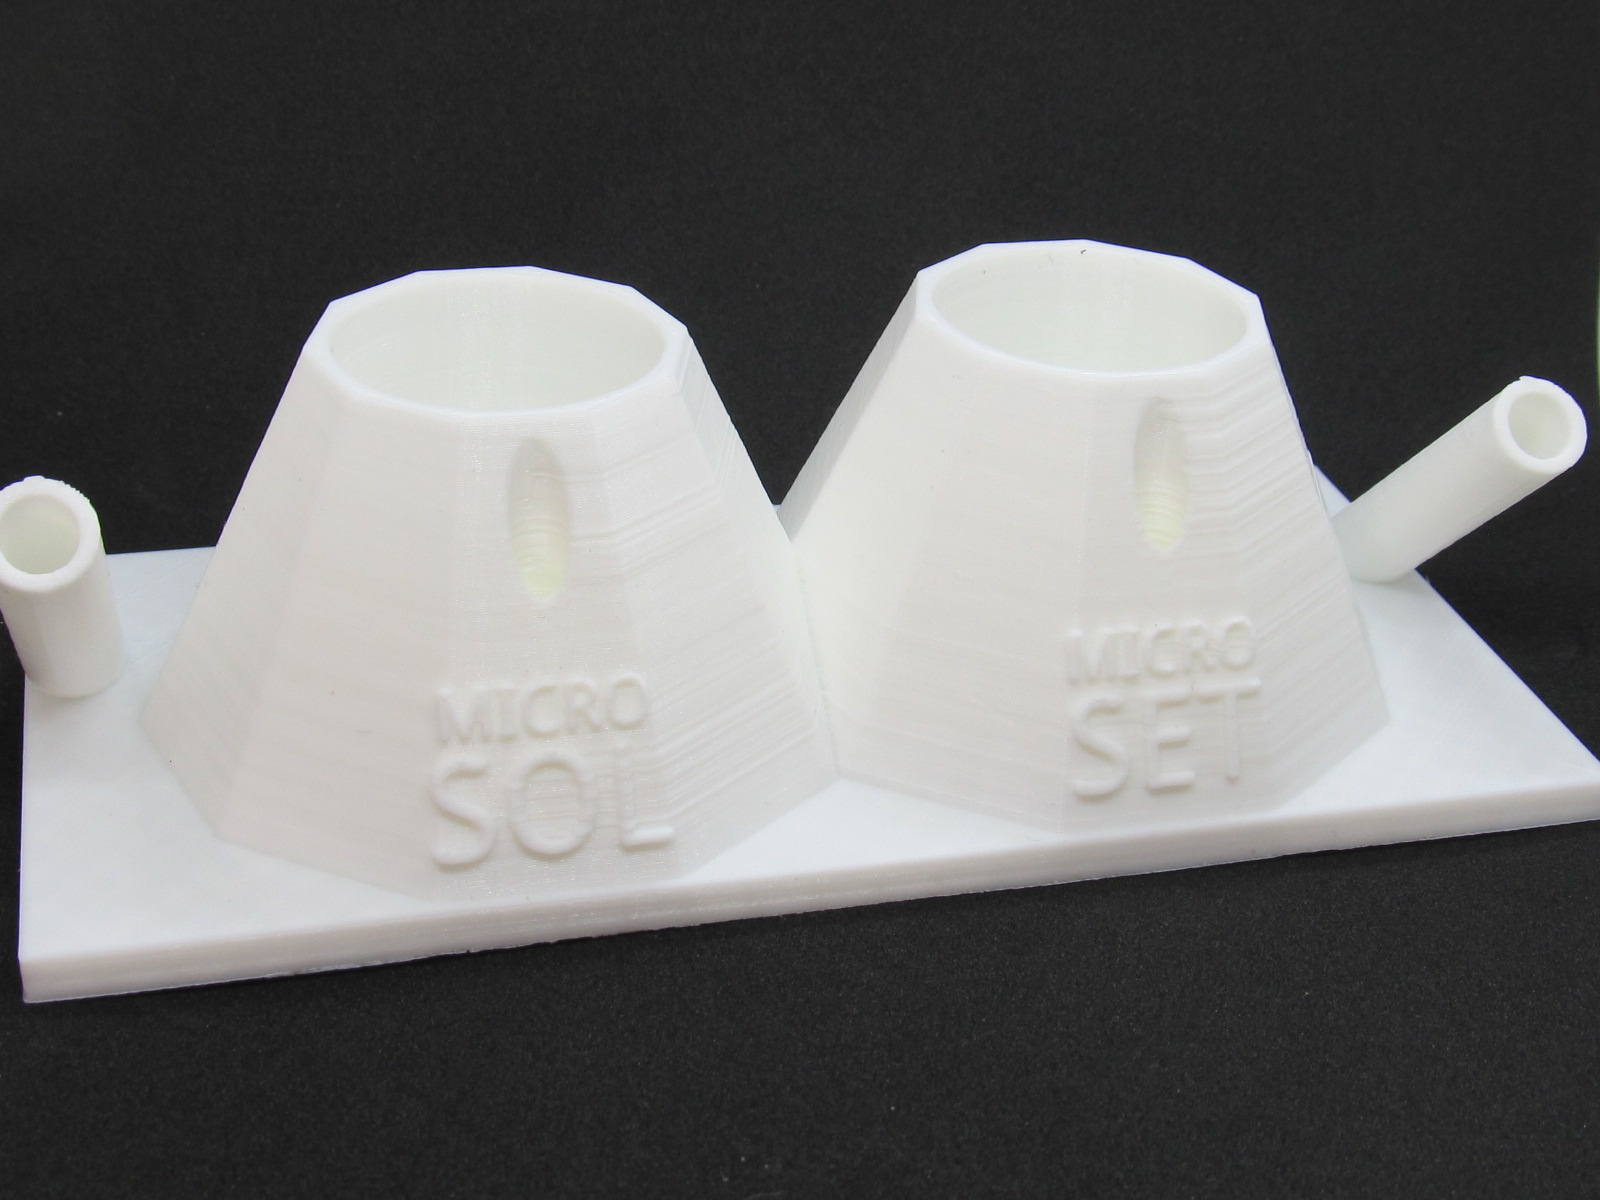 Oldsarges Aircraft Model blog: Making a Micro set and sol holder. 3d  printing for the modeler